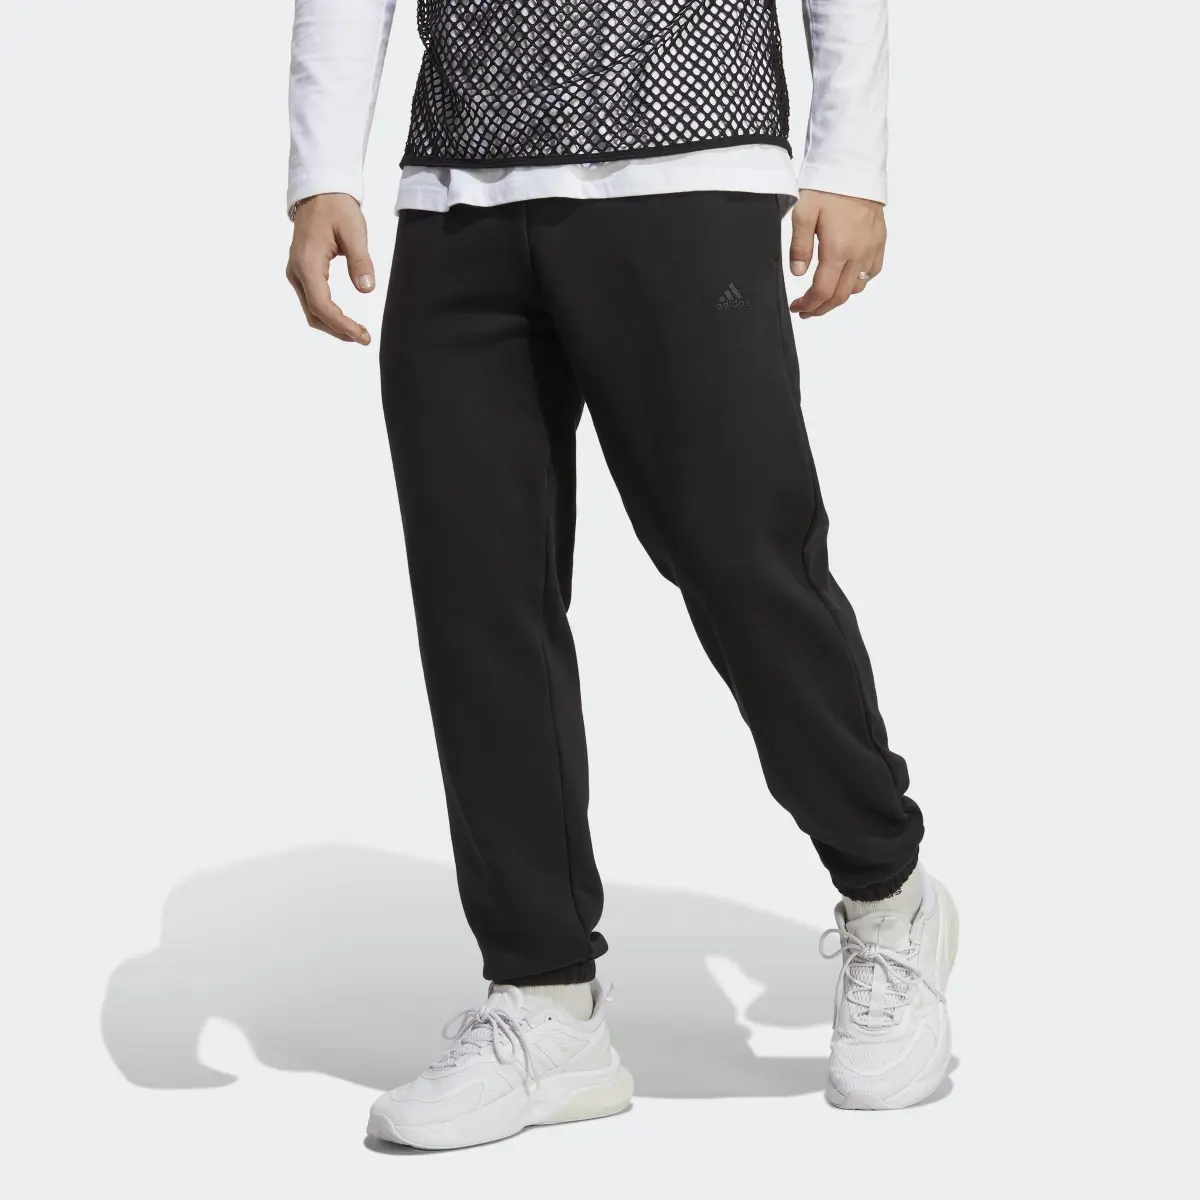 Adidas ALL SZN French Terry Pants. 1